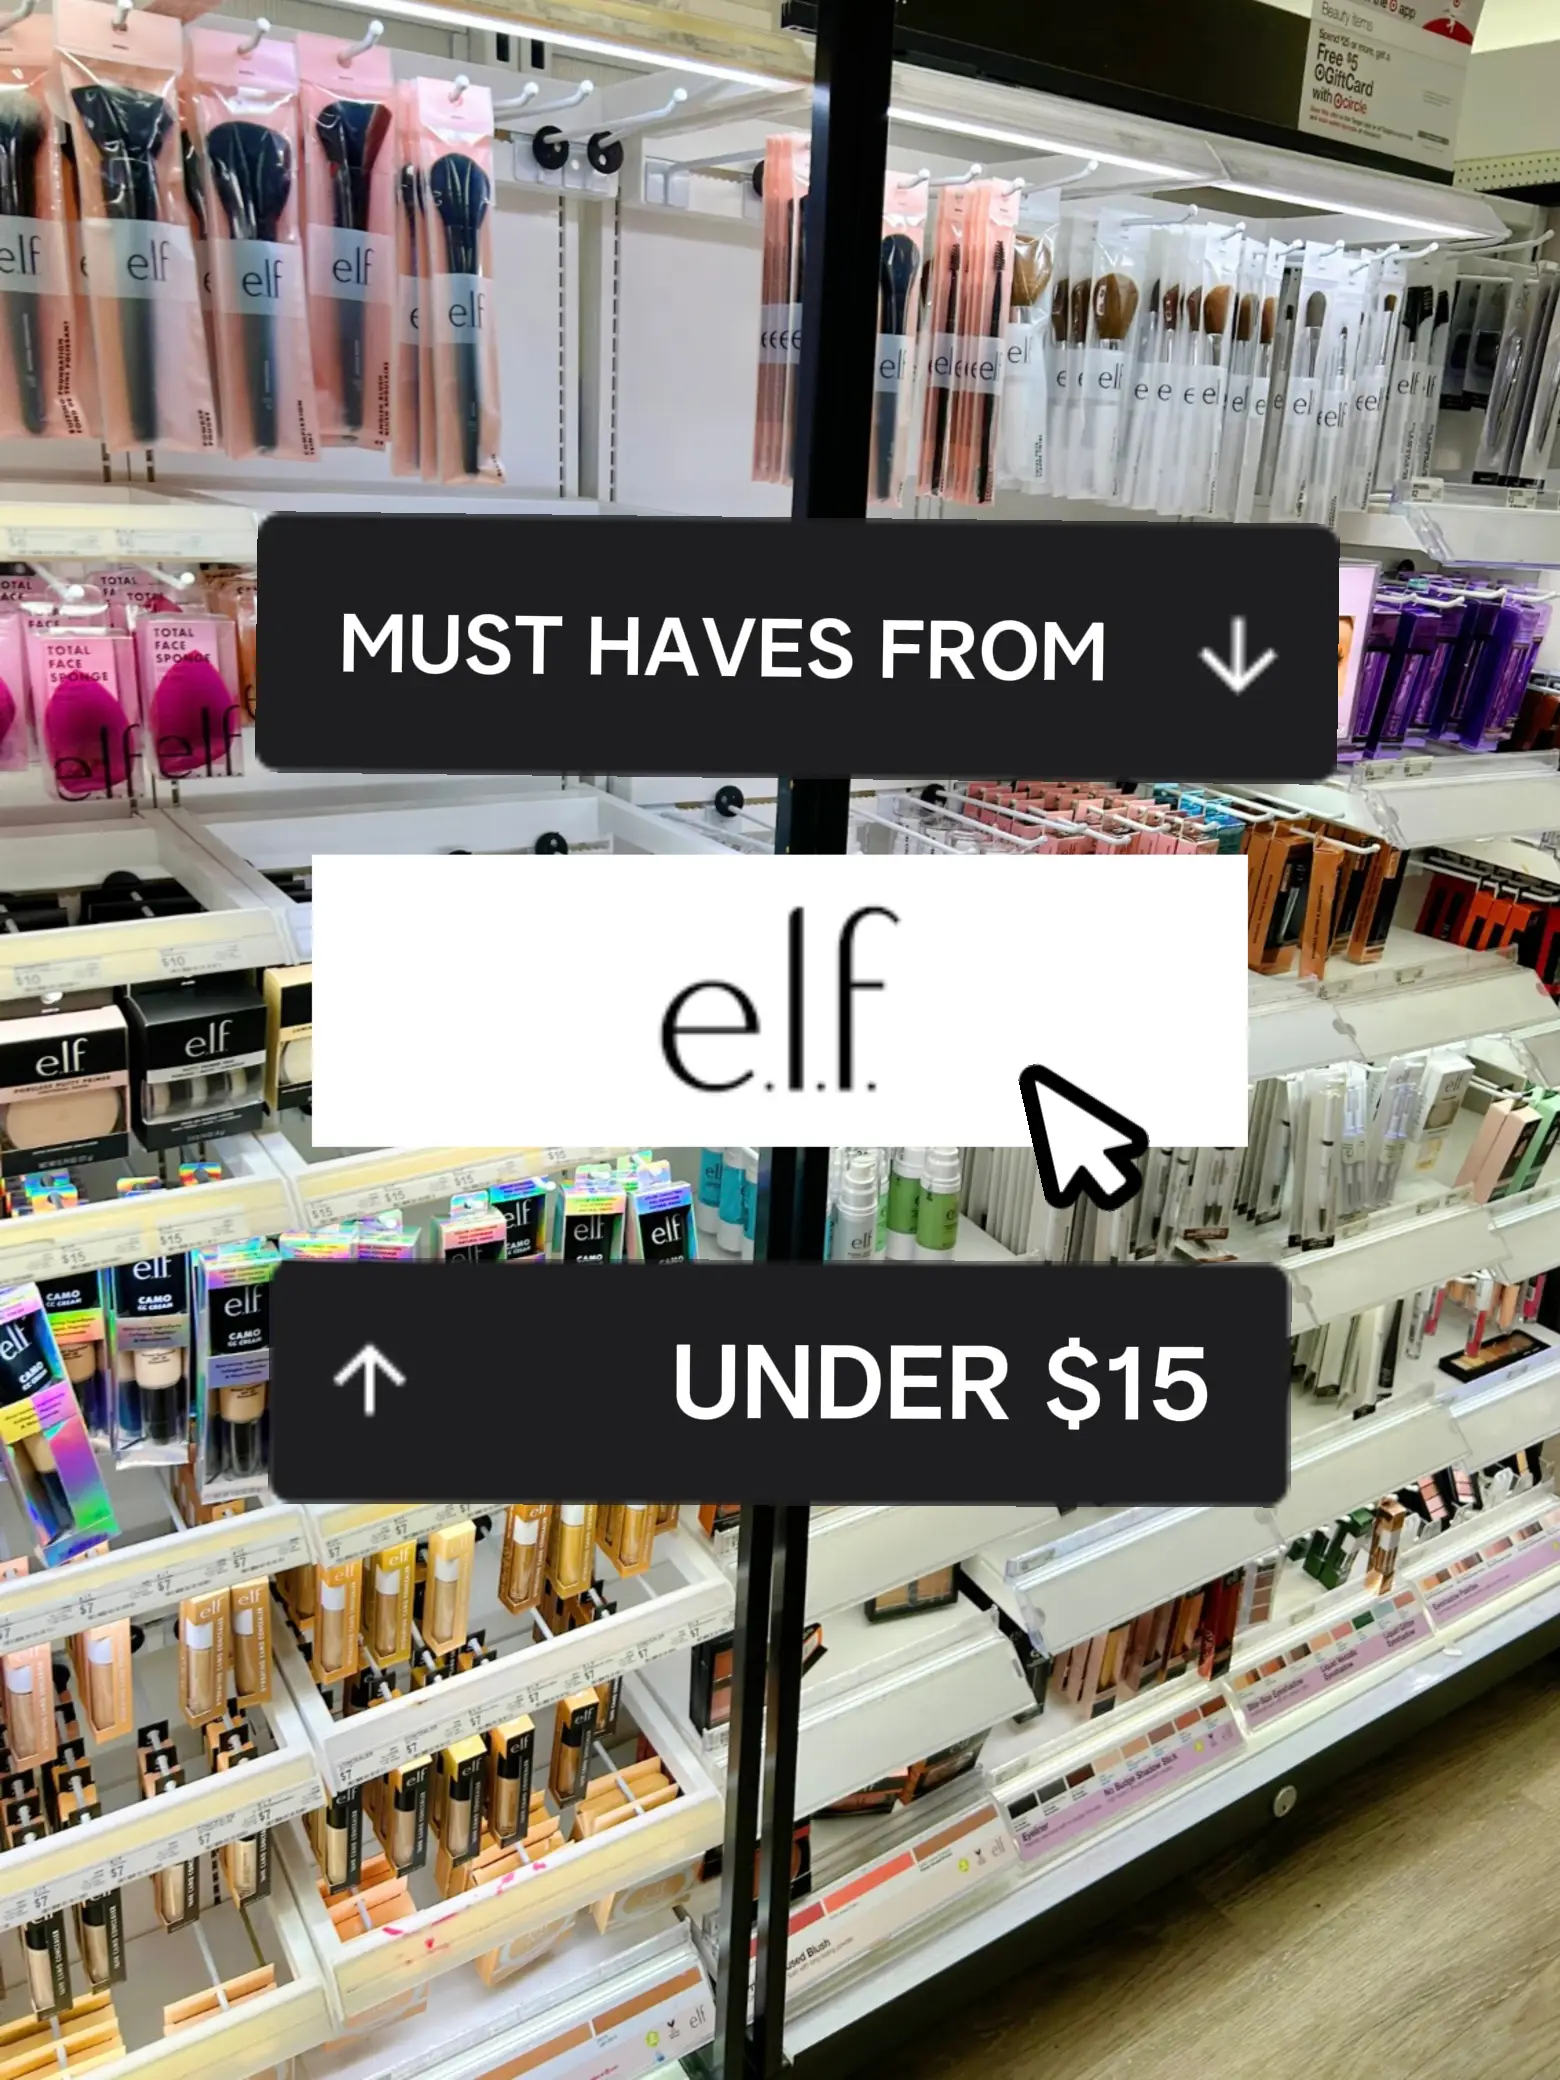 ✨ELF MUST HAVES UNDER $15✨'s images